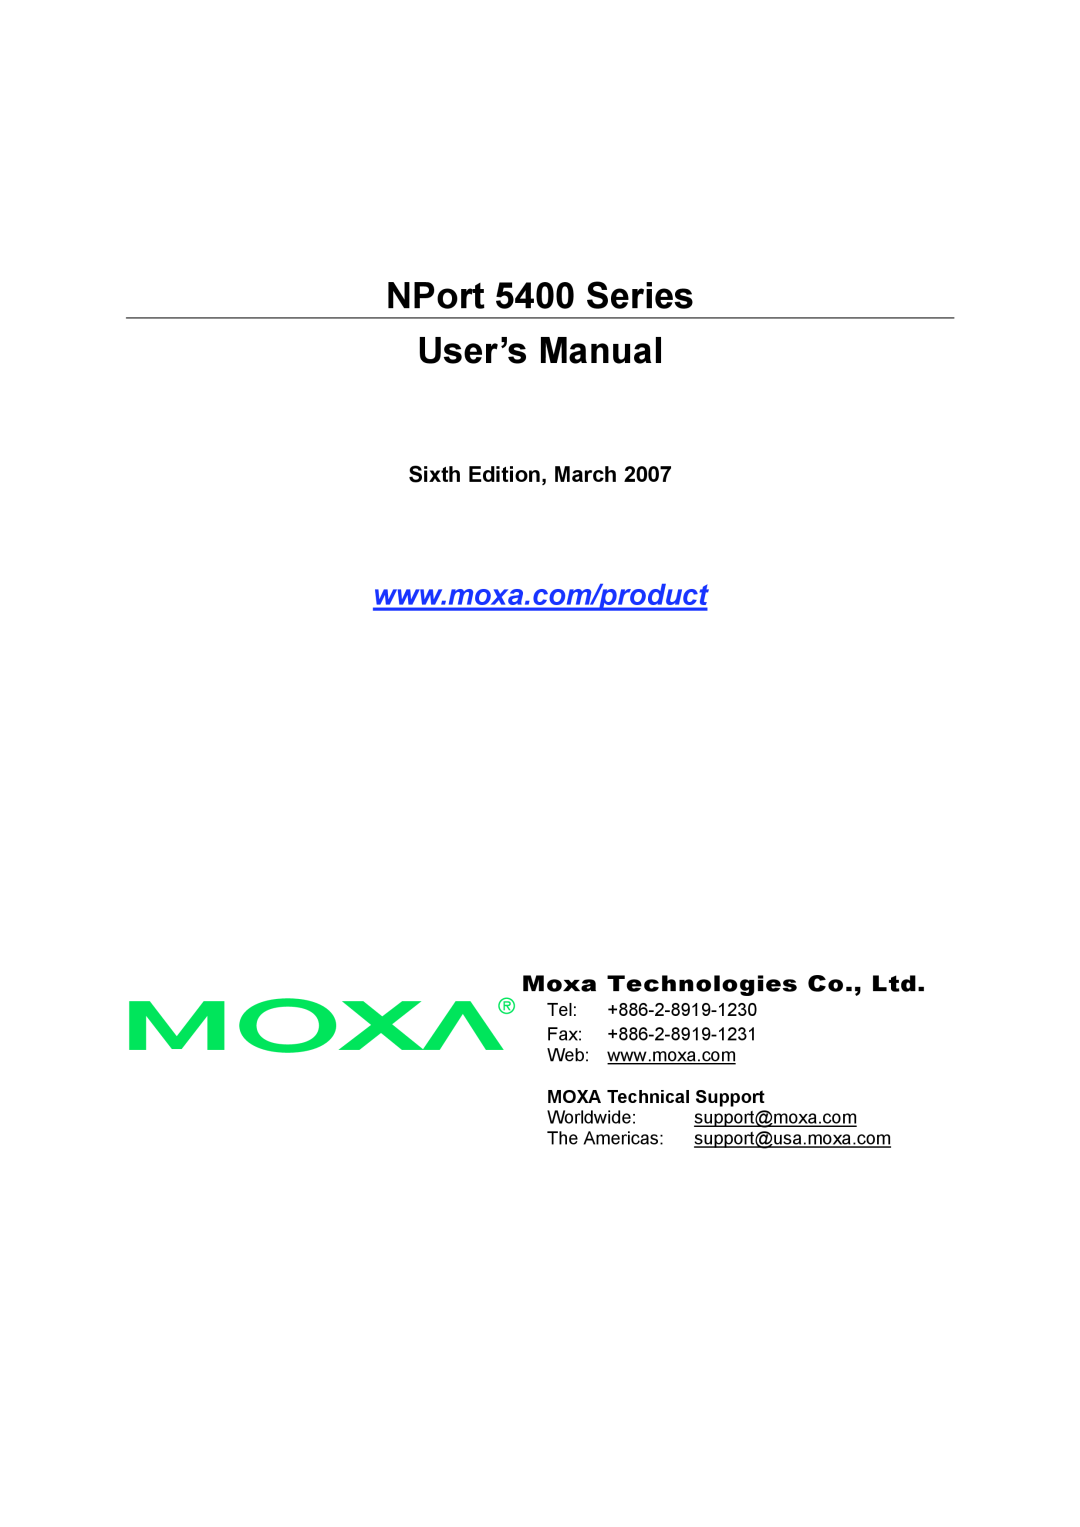 Moxa Technologies user manual NPort 5400 Series, User’s Manual, Sixth Edition, March, MOXA Technical Support 